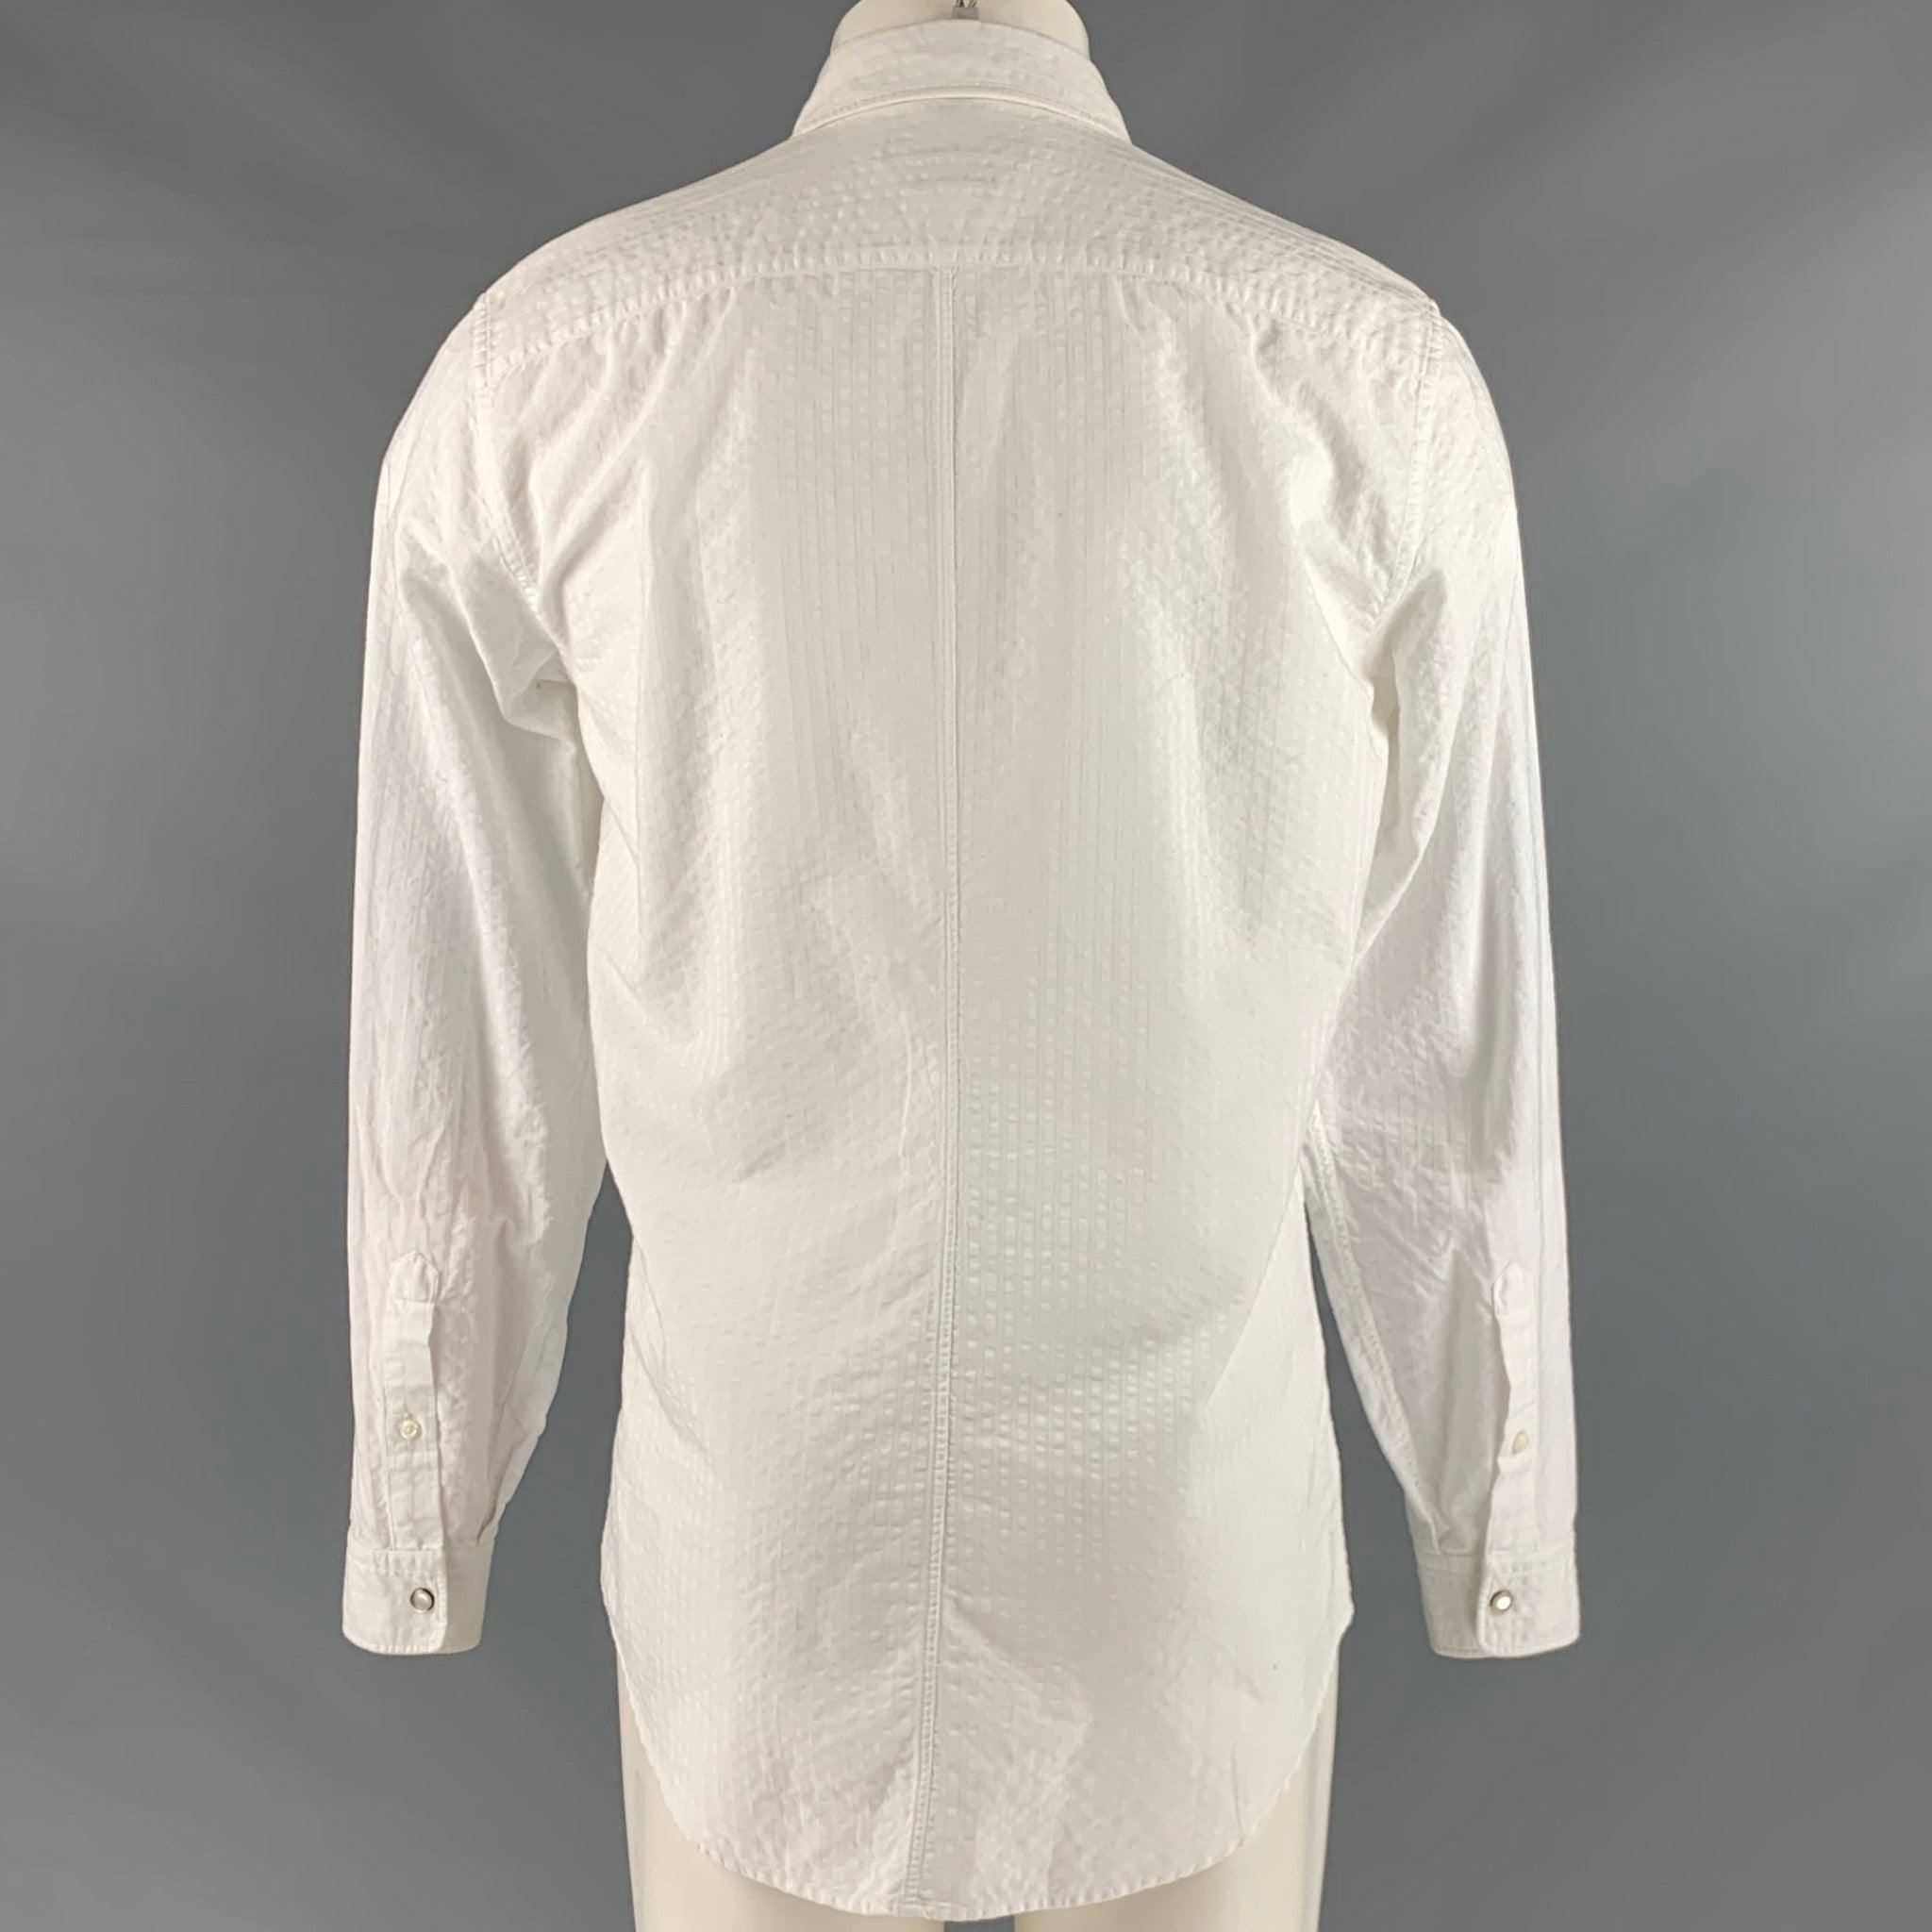 MARC JACOBS Size M White Seersucker Cotton Snaps Long Sleeve Shirt In Good Condition For Sale In San Francisco, CA